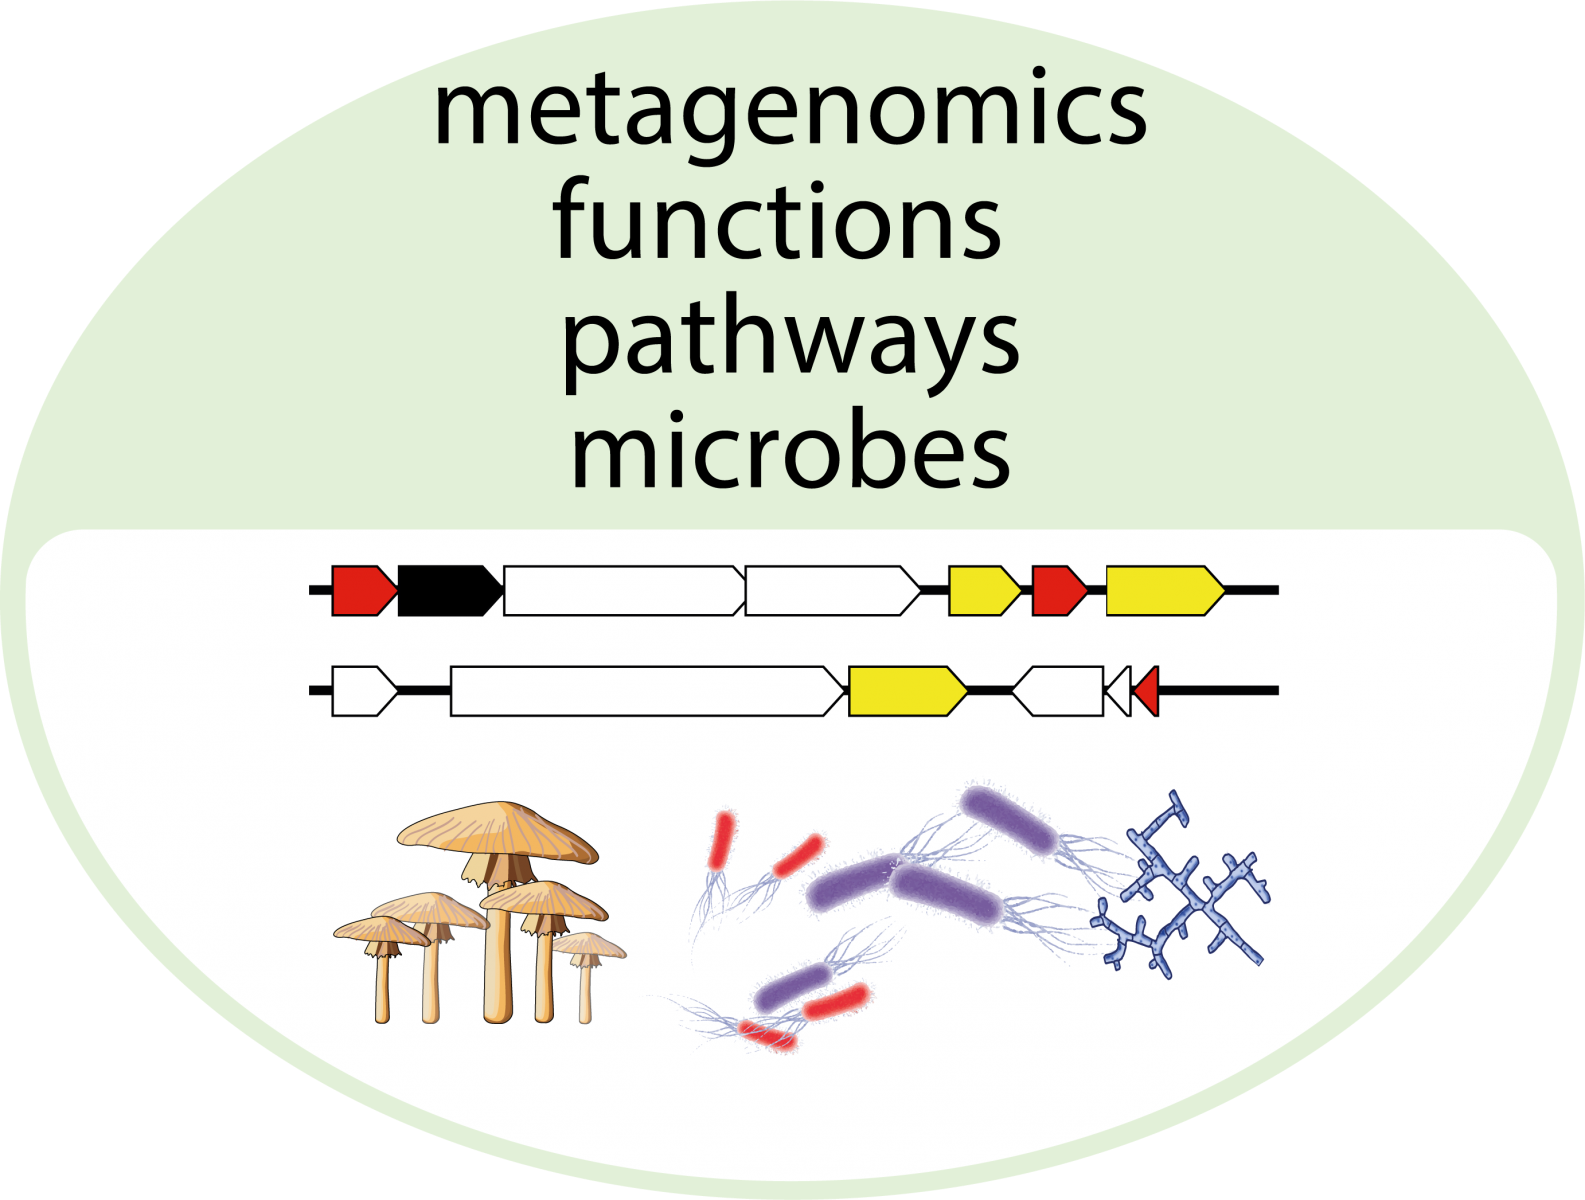 Graphic showing schematic genes, fungi and microbes